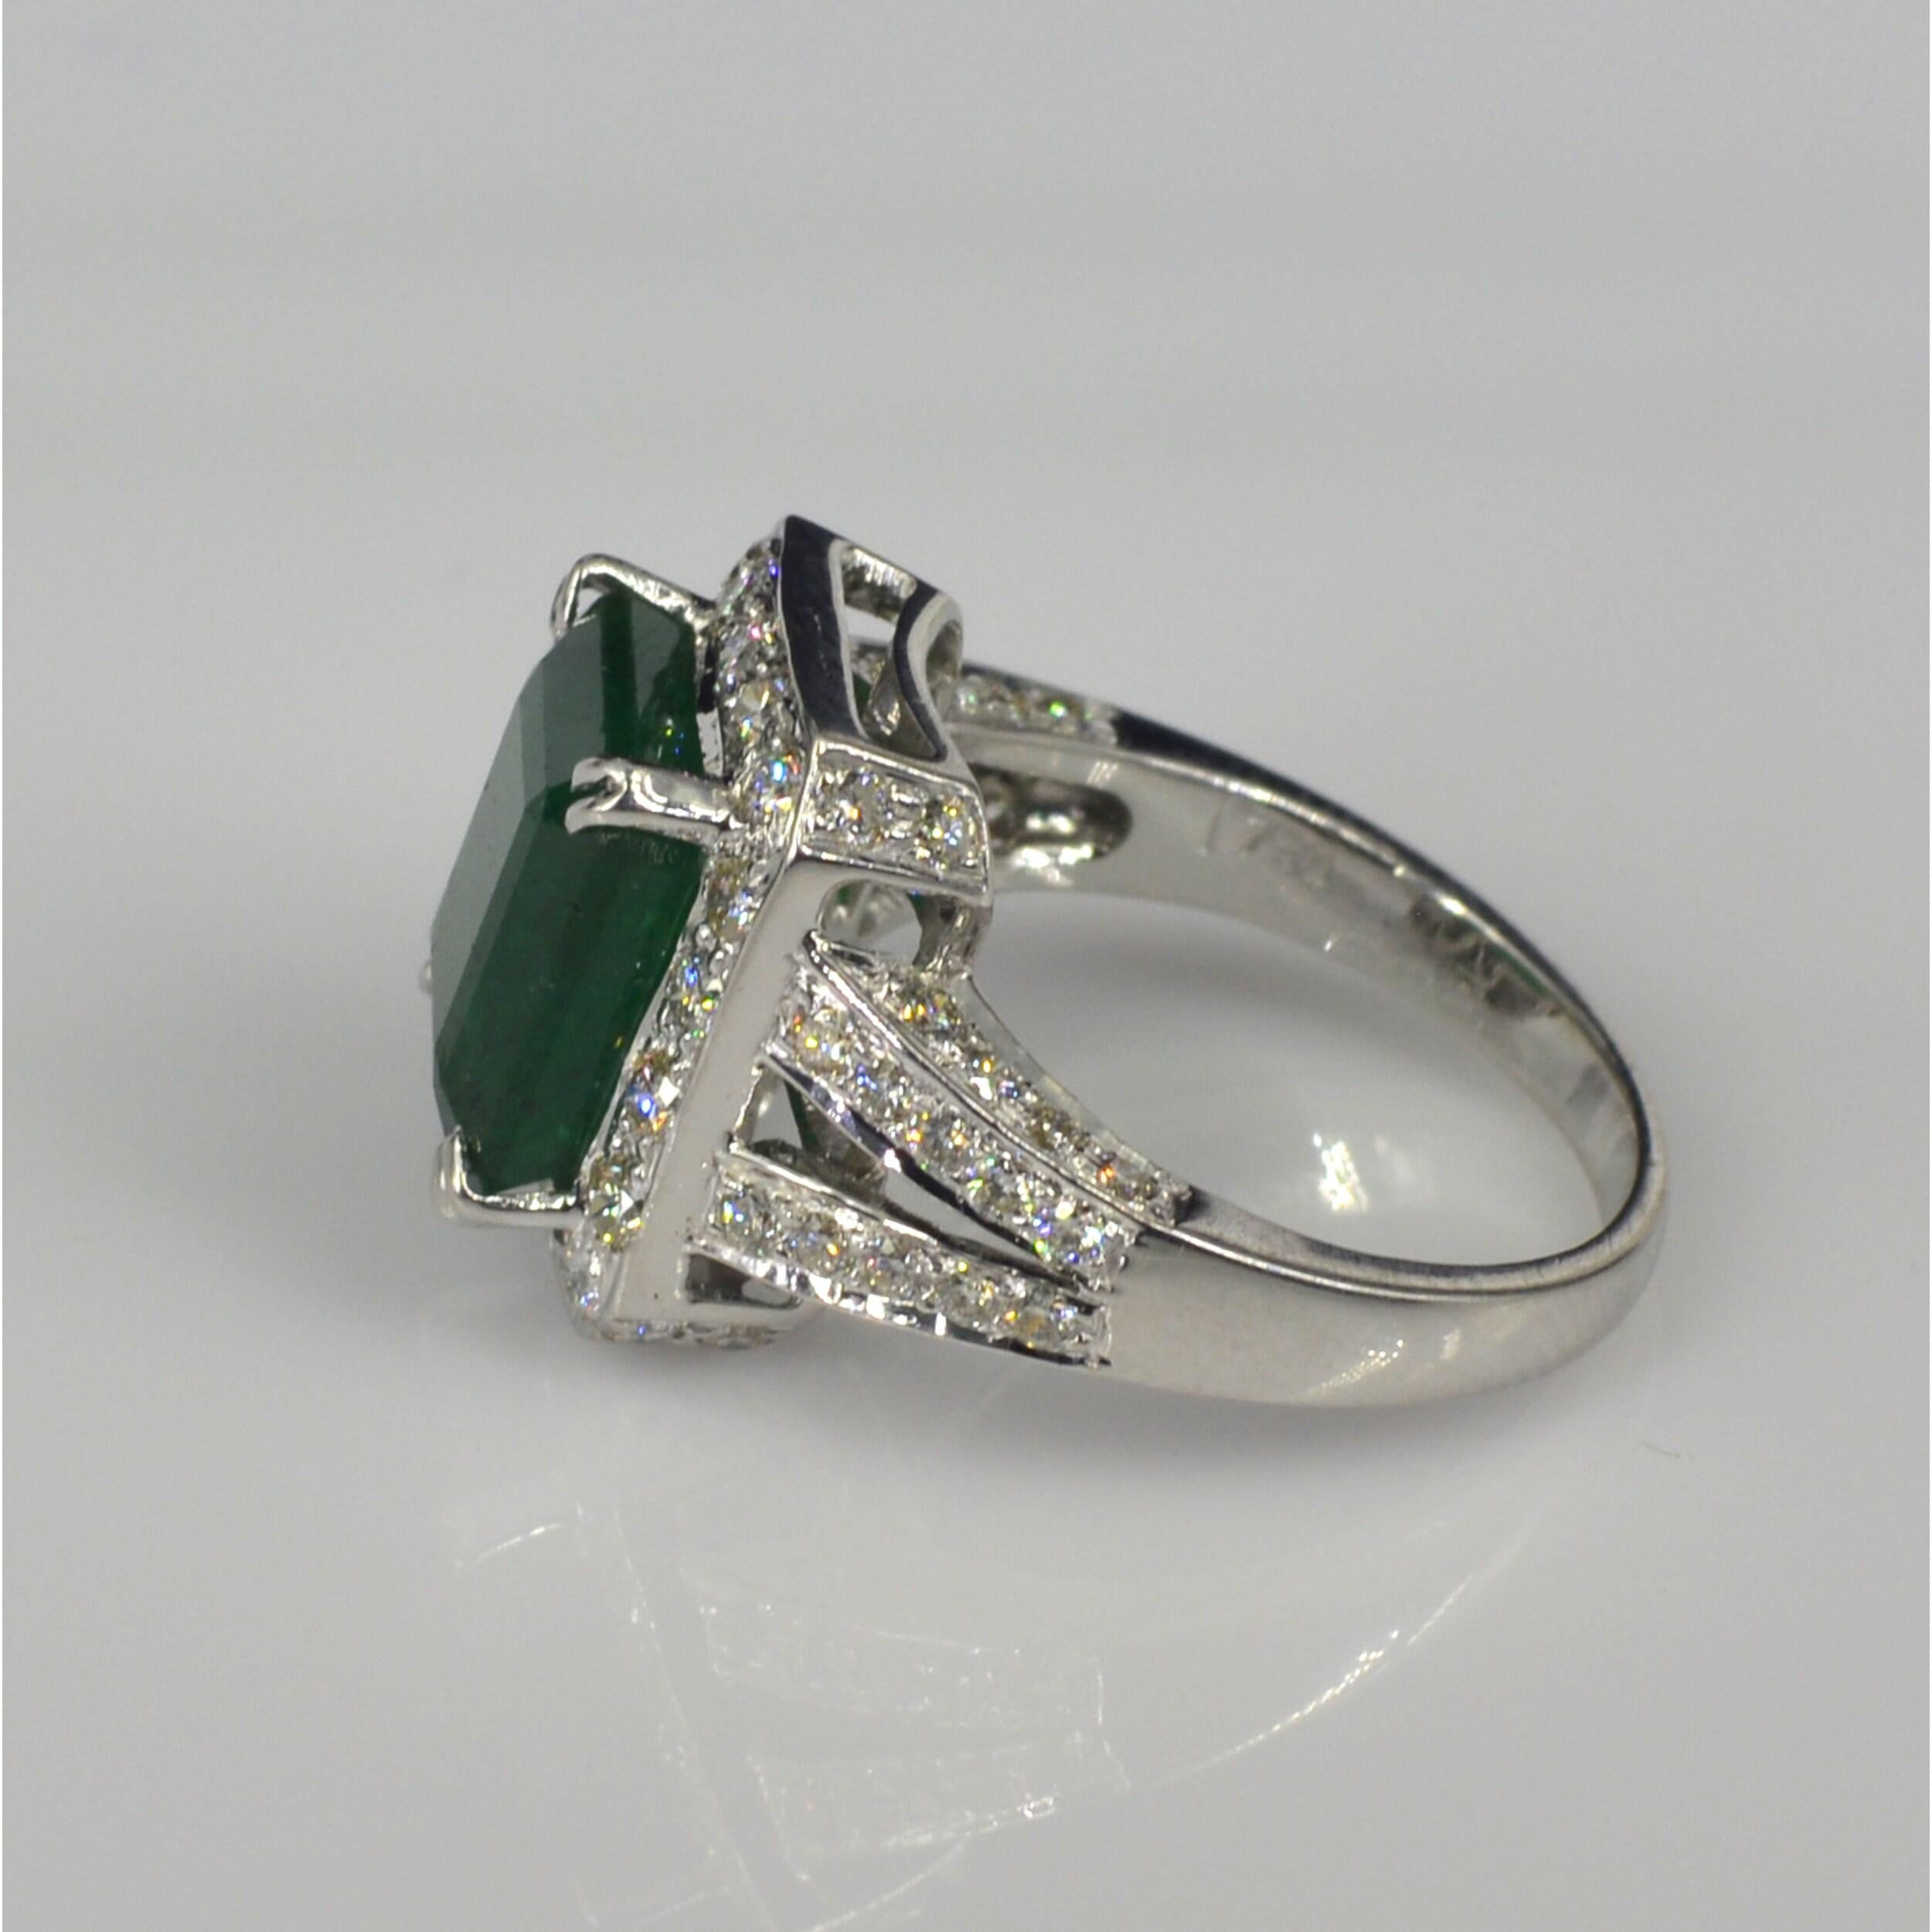 For Sale:  5 Carat Emerald Diamond Engagement Ring, Emerald Statement Ring 4